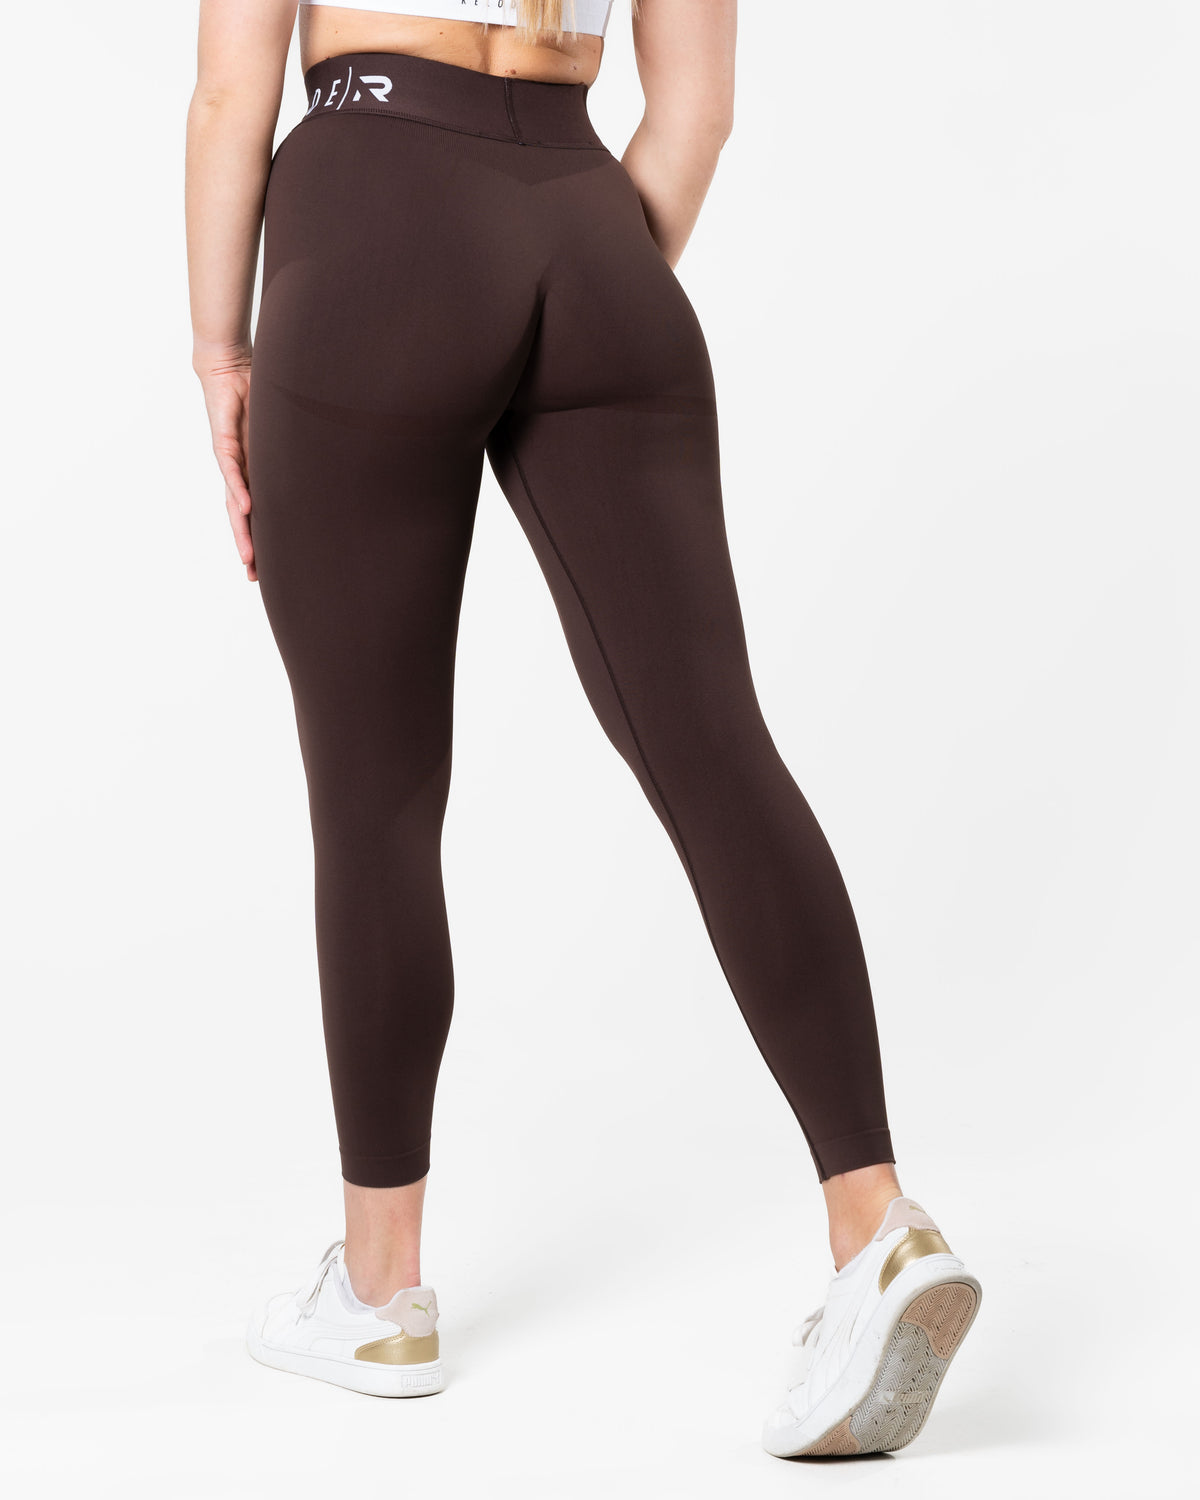 Apex Seamless Tights - Brown